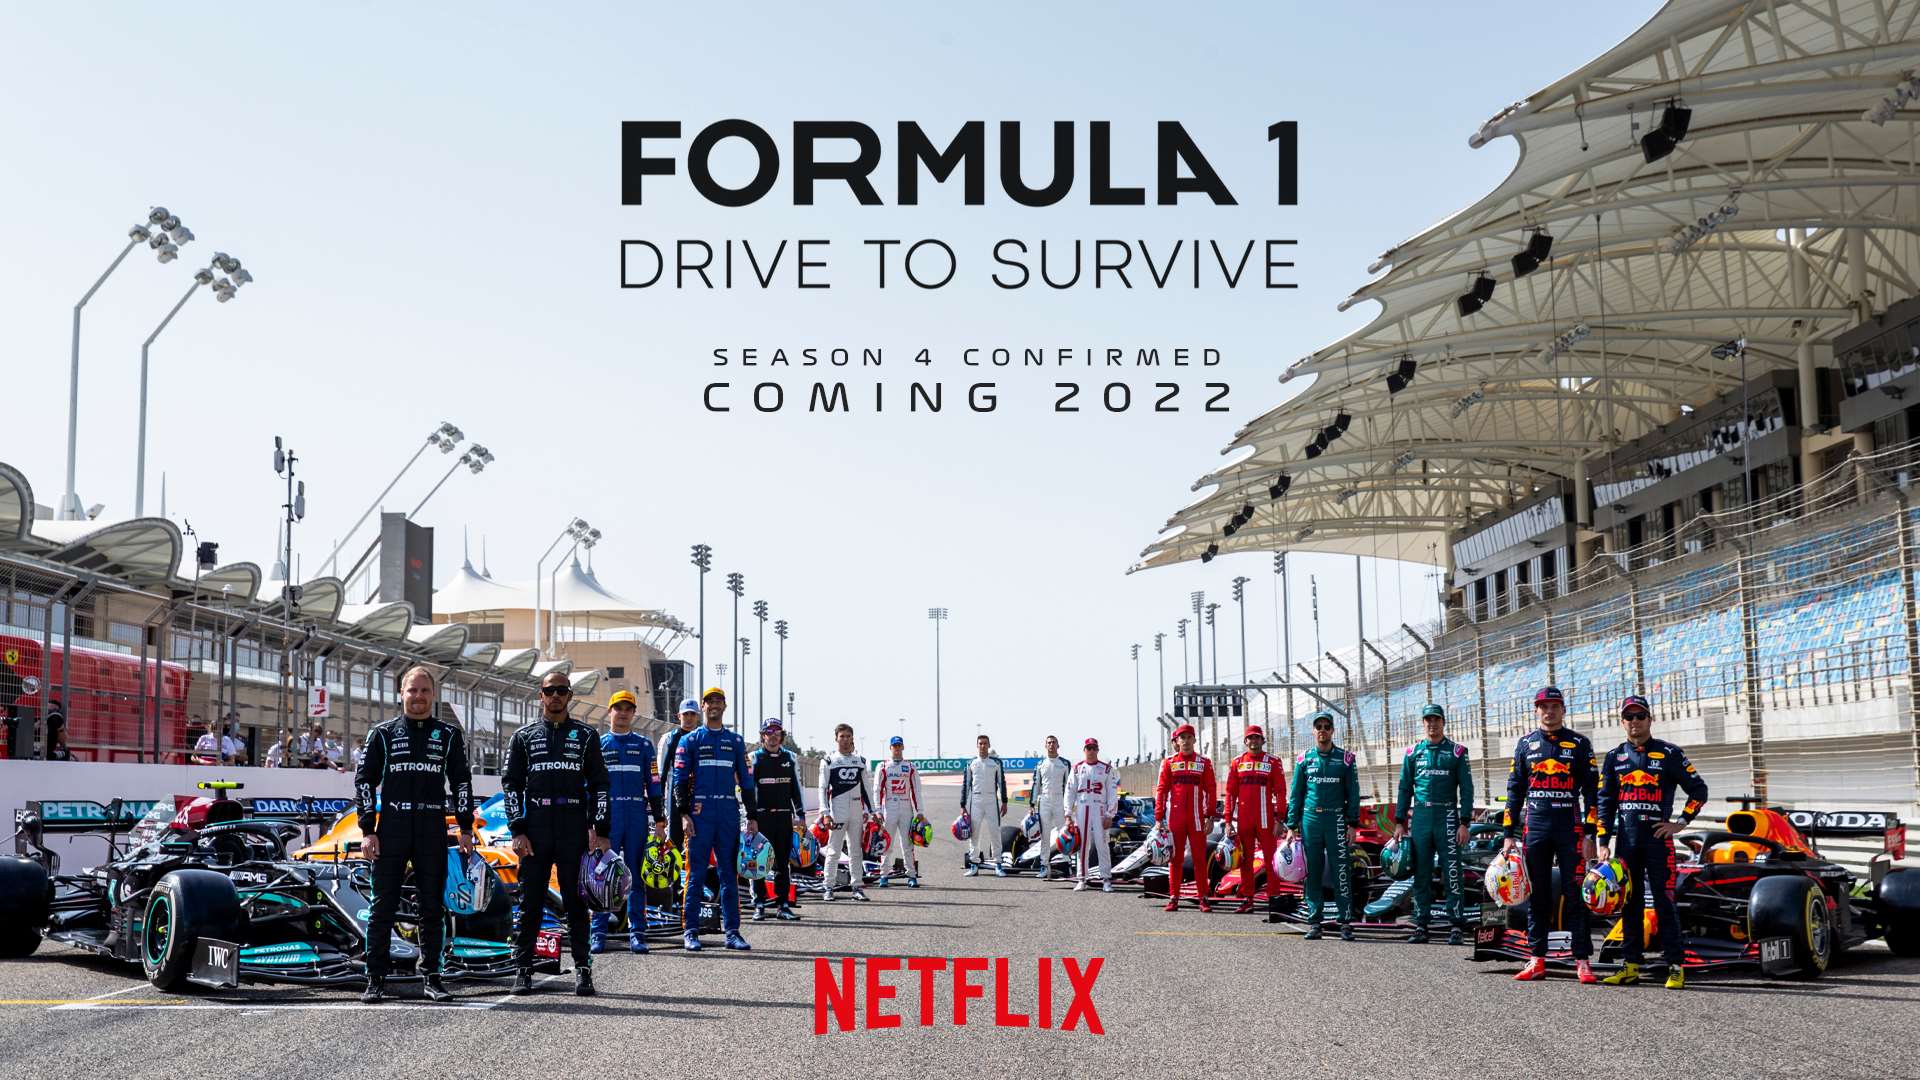 Updated Netflix confirms F1 Drive to Survive Season 4 GRR